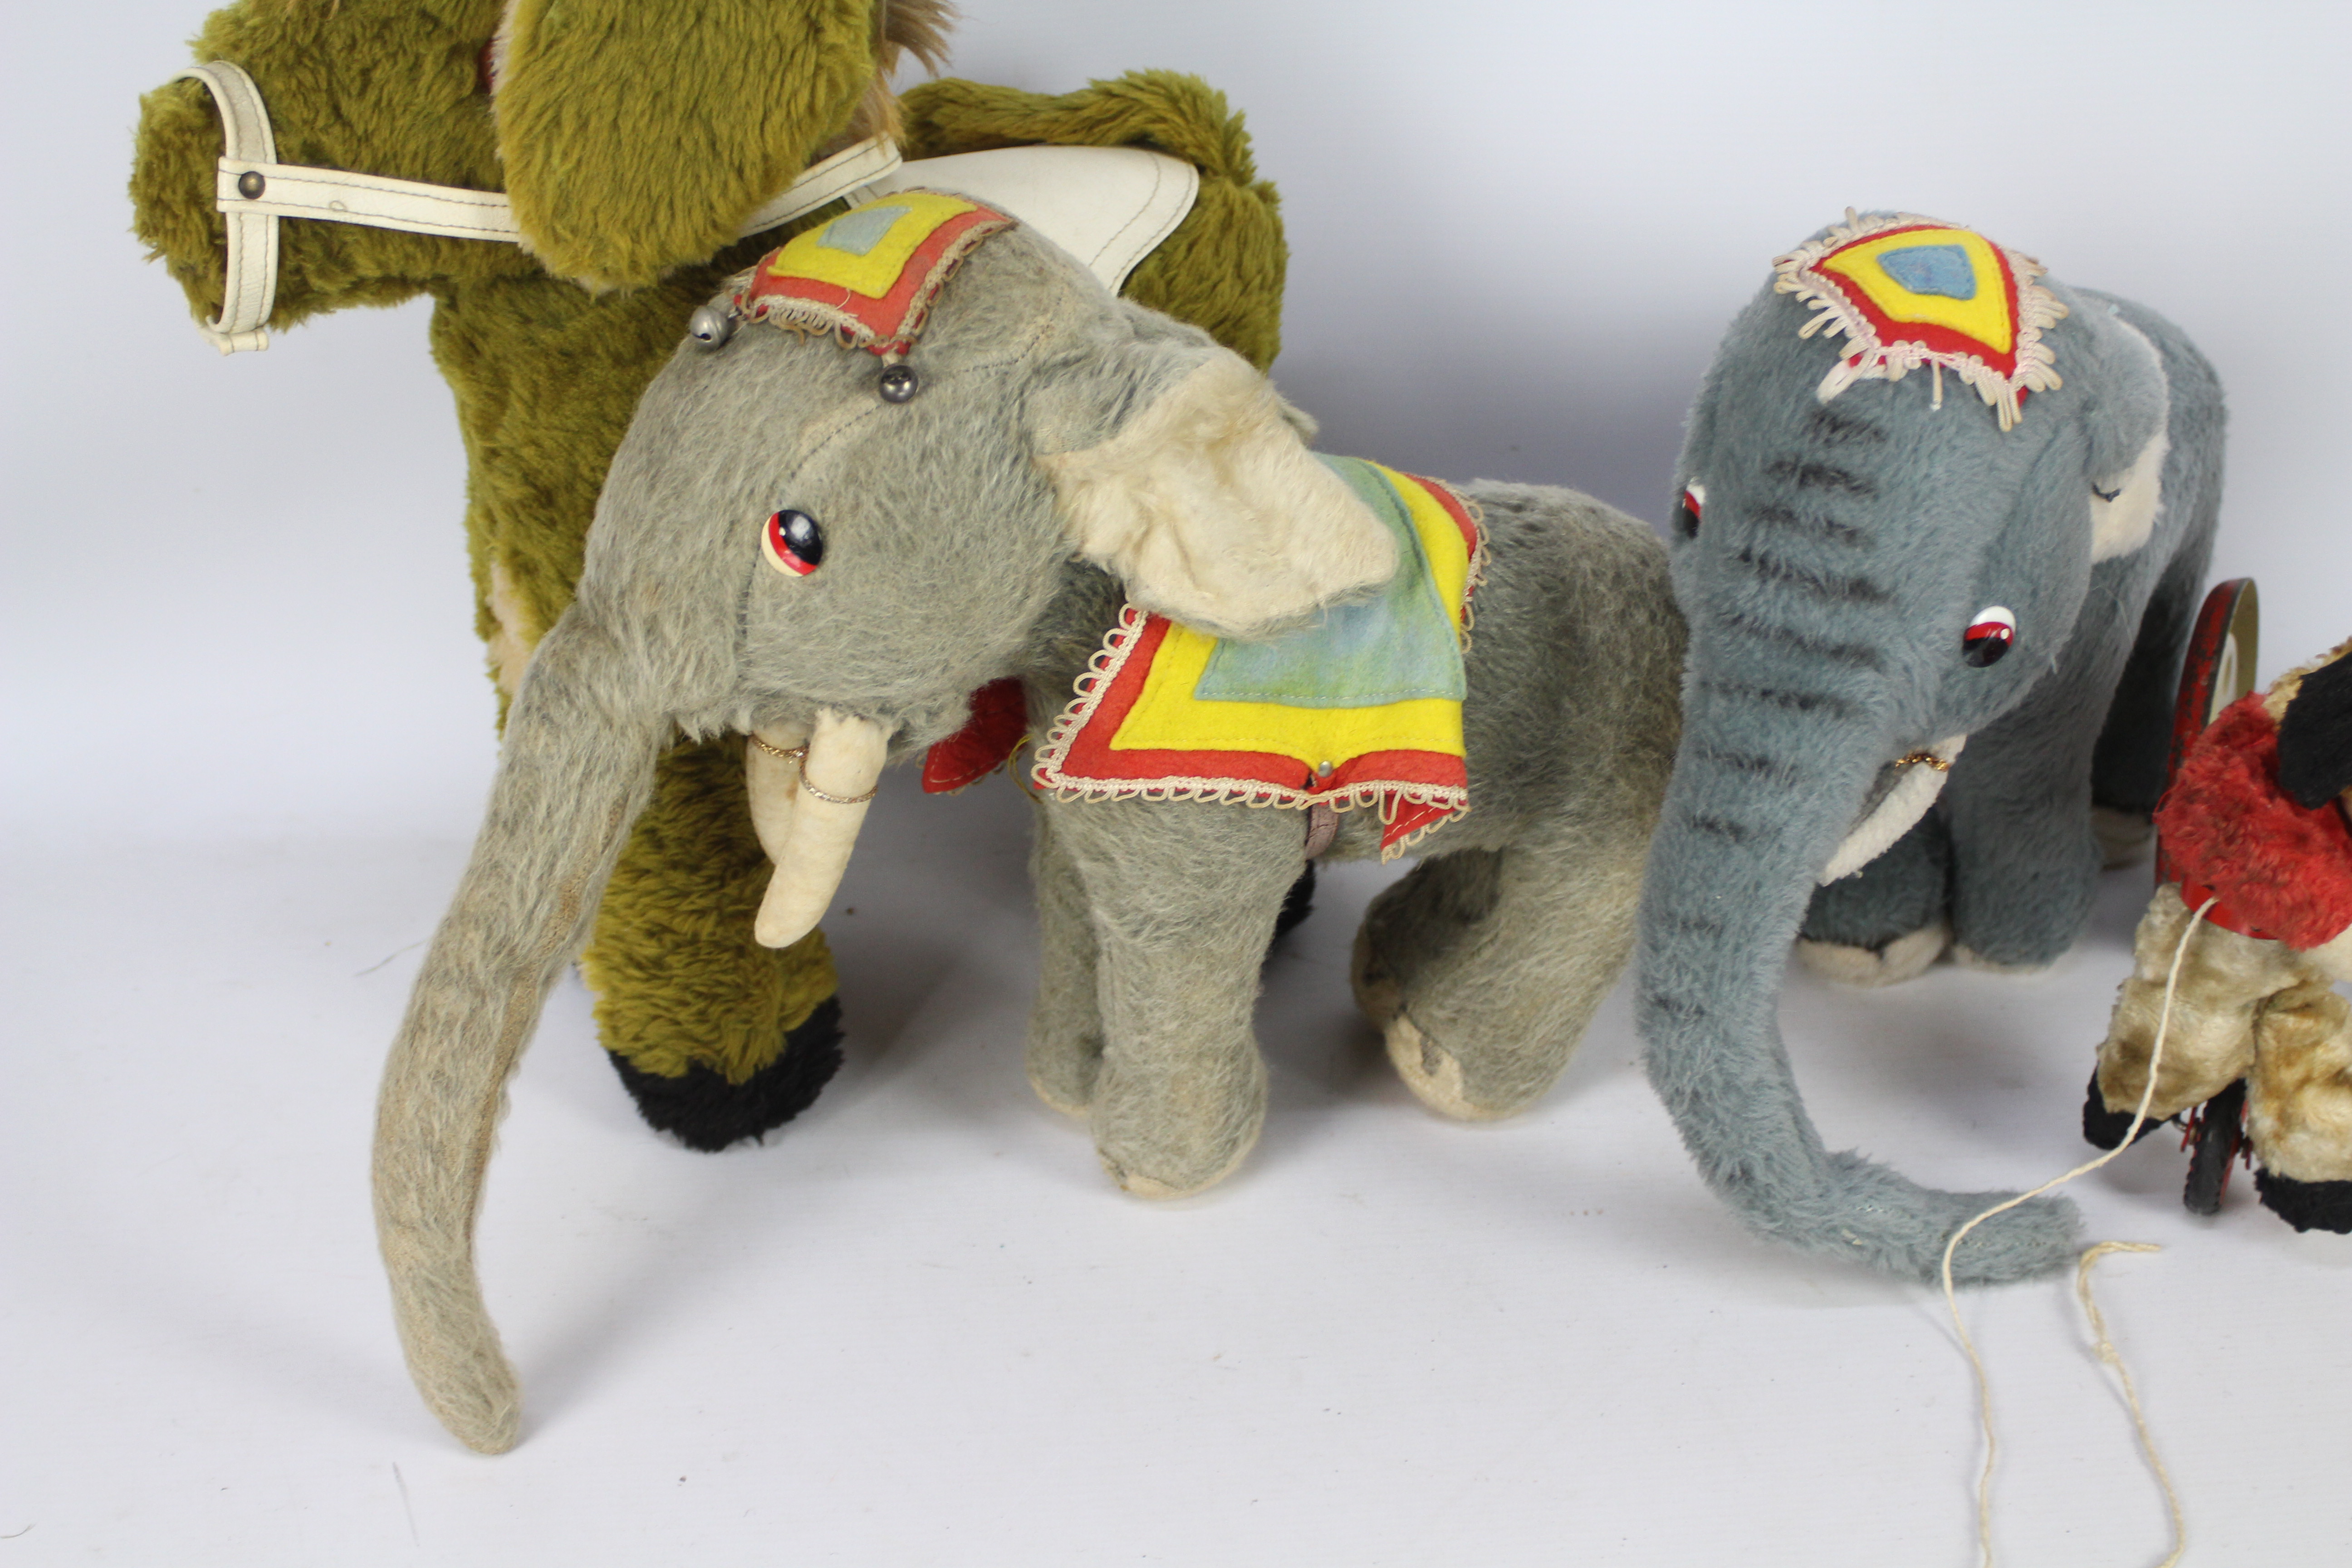 Pedigree, Chiltern, Merrythought, Other - A collection of five vintage soft toys. - Image 10 of 11